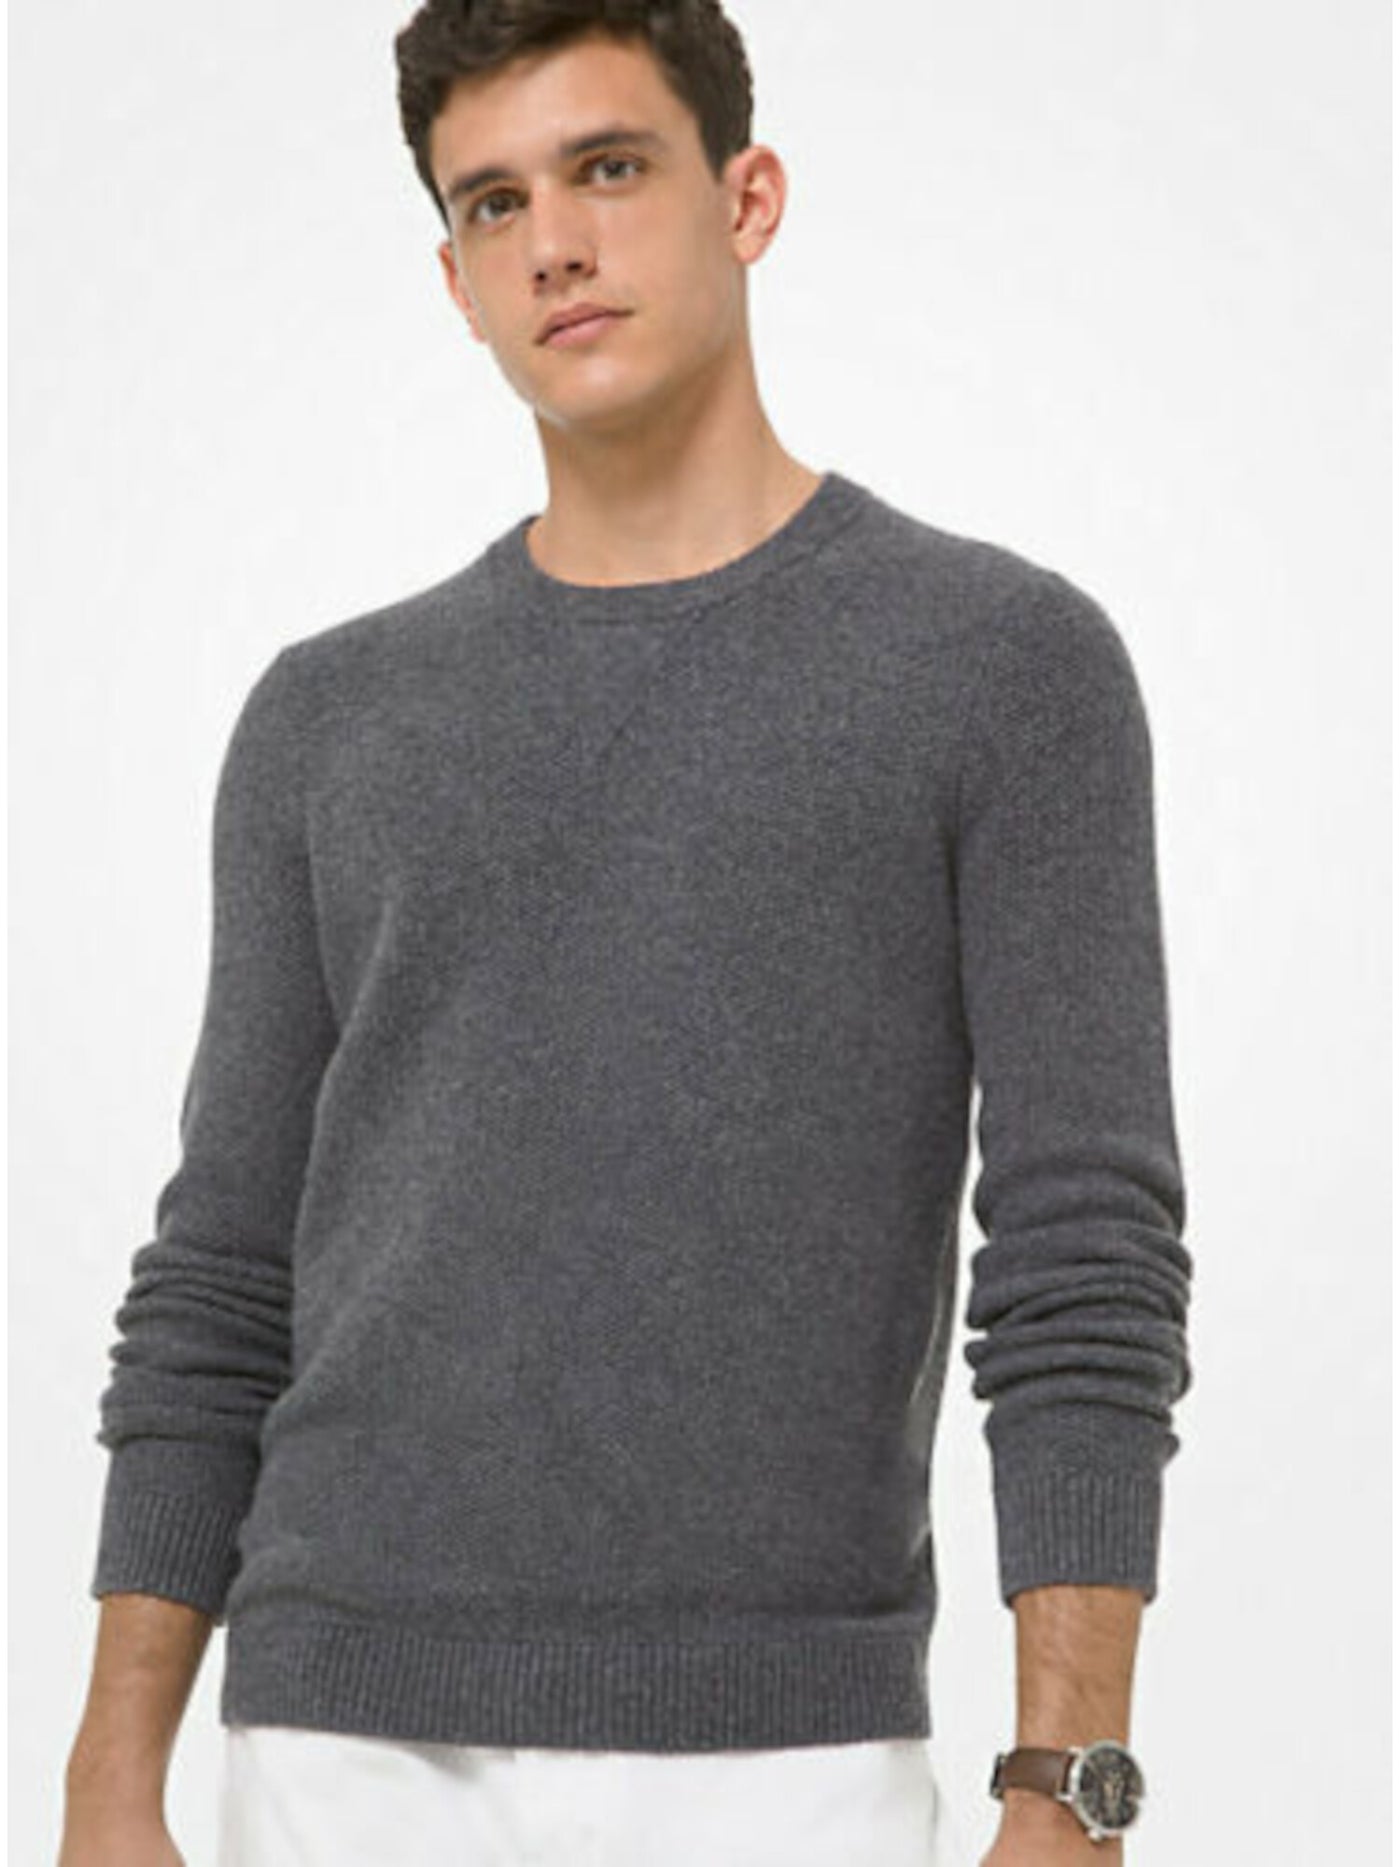 MICHAEL KORS Mens Gray Long Sleeve Crew Neck Classic Fit Pullover Sweater S